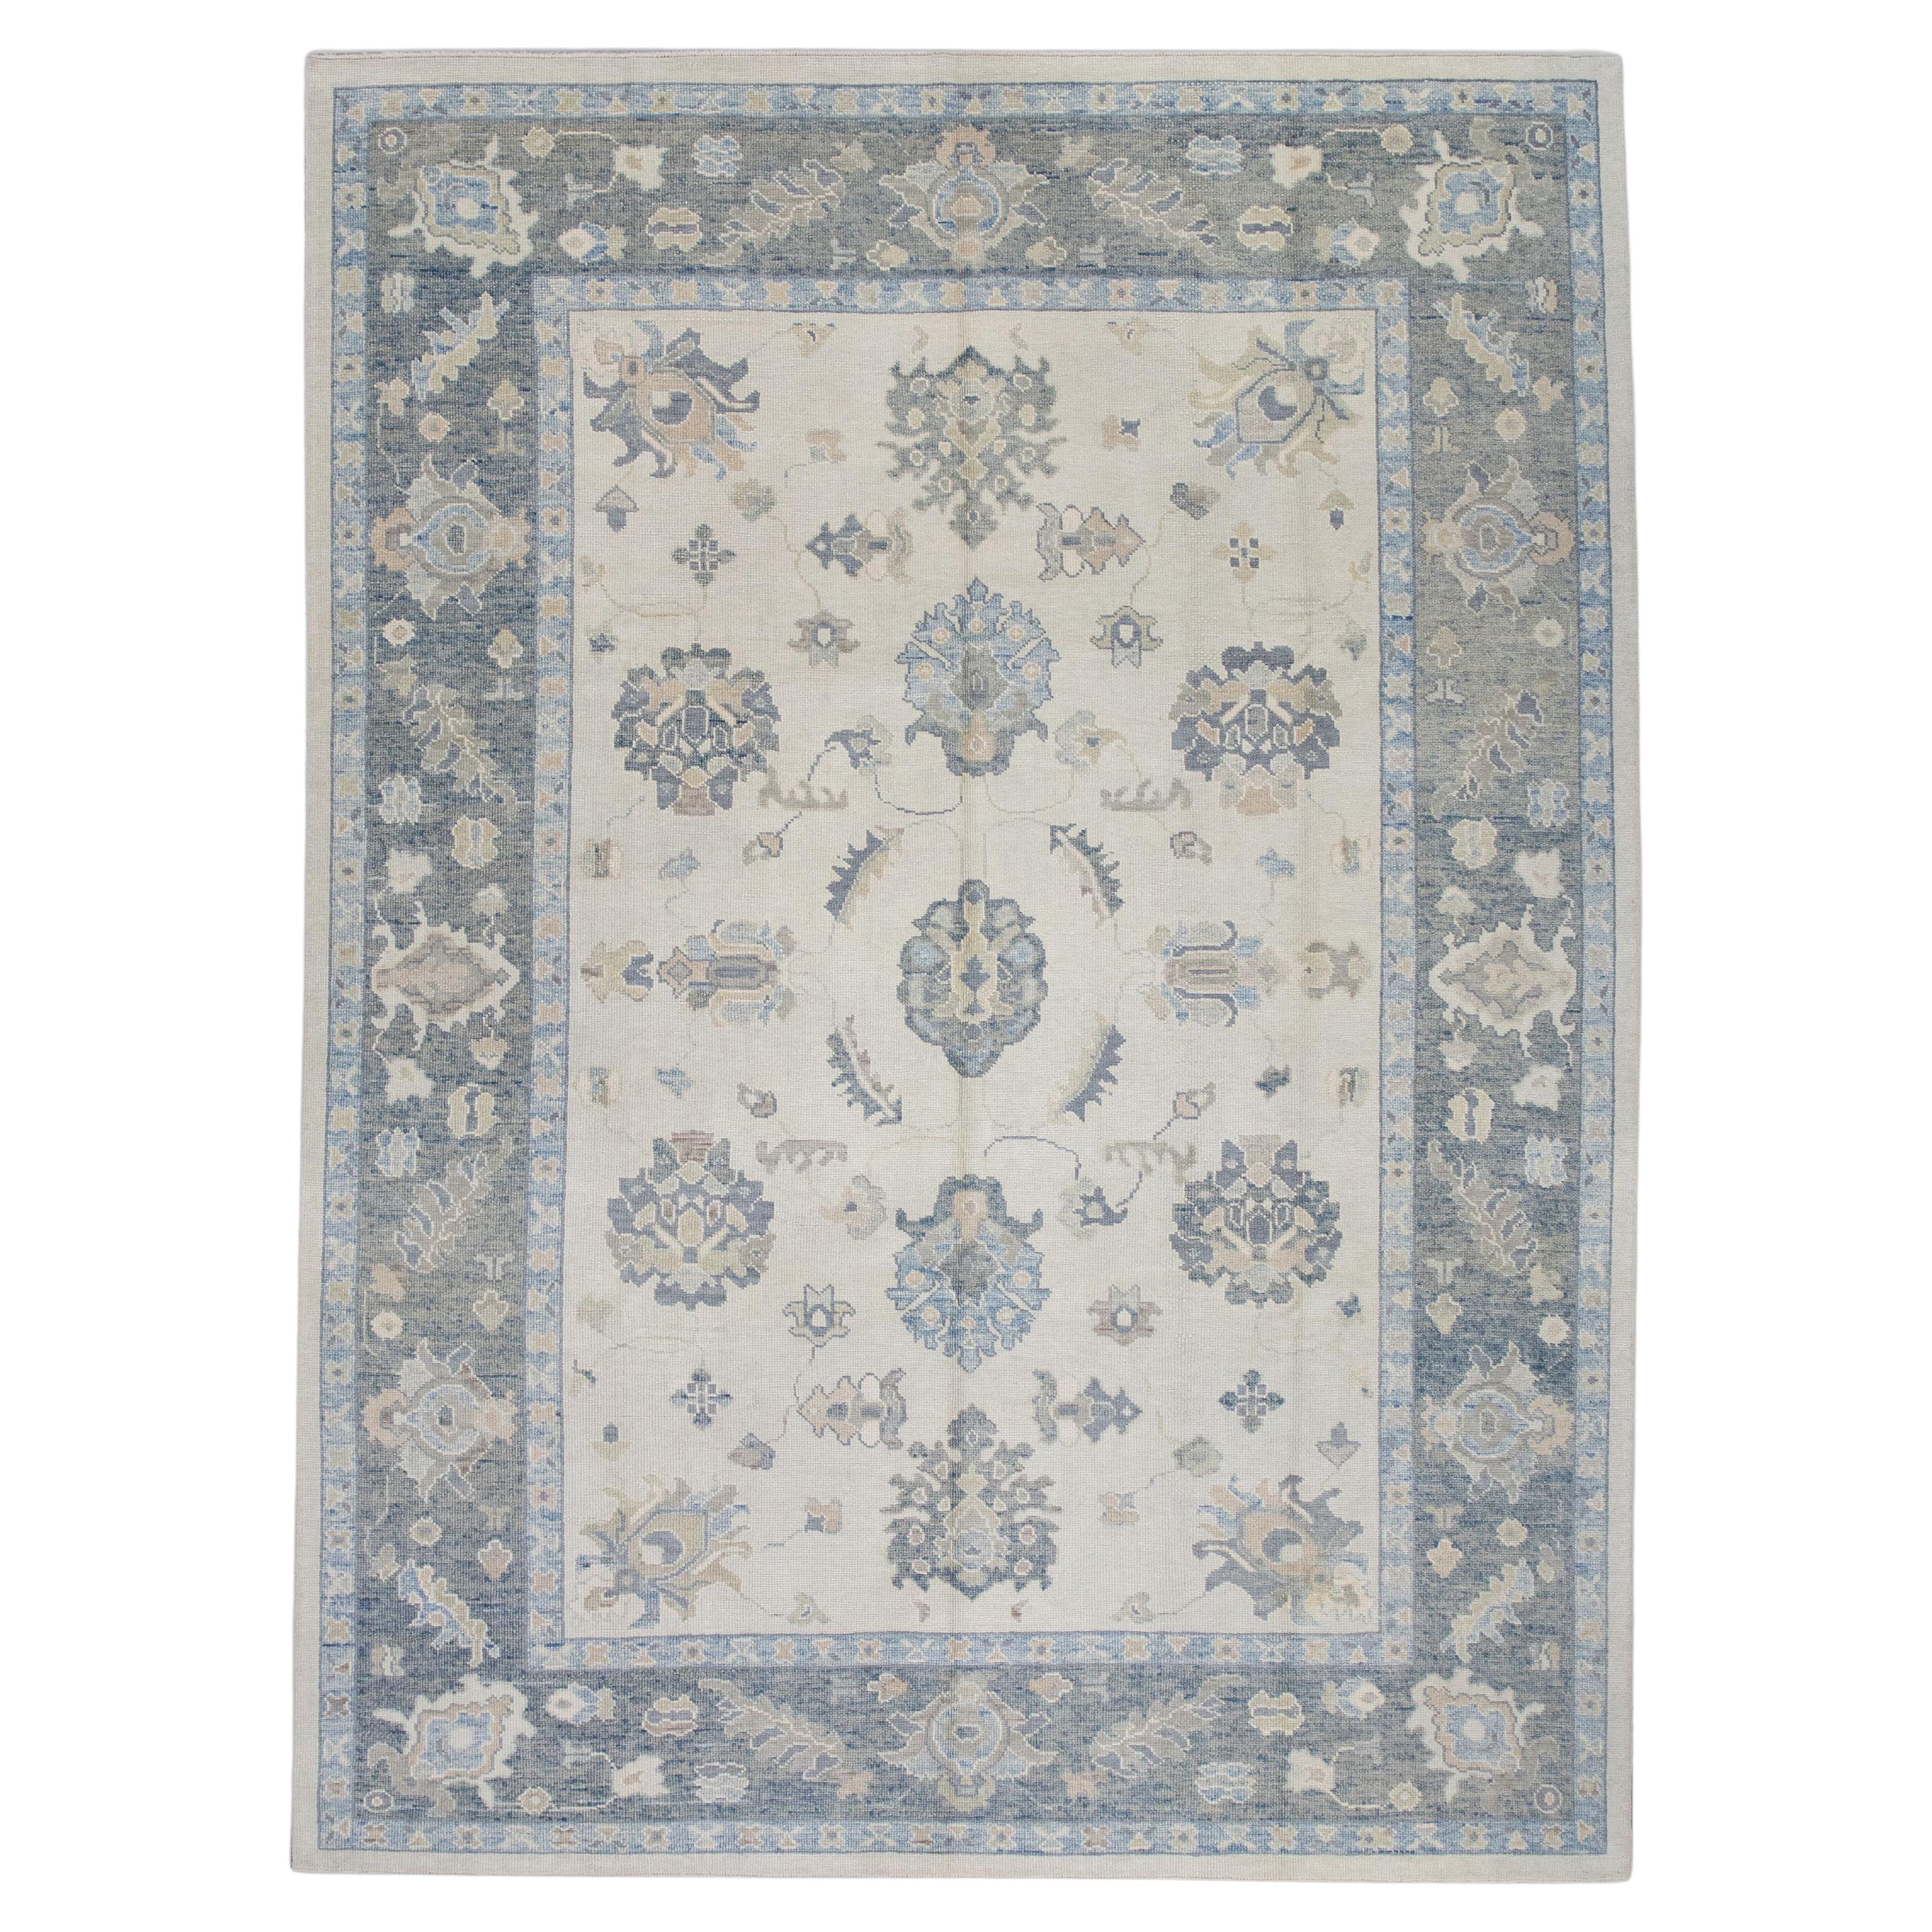 Cream & Gray Floral Design Handwoven Wool Turkish Oushak Rug 8'9" X 11'8" For Sale